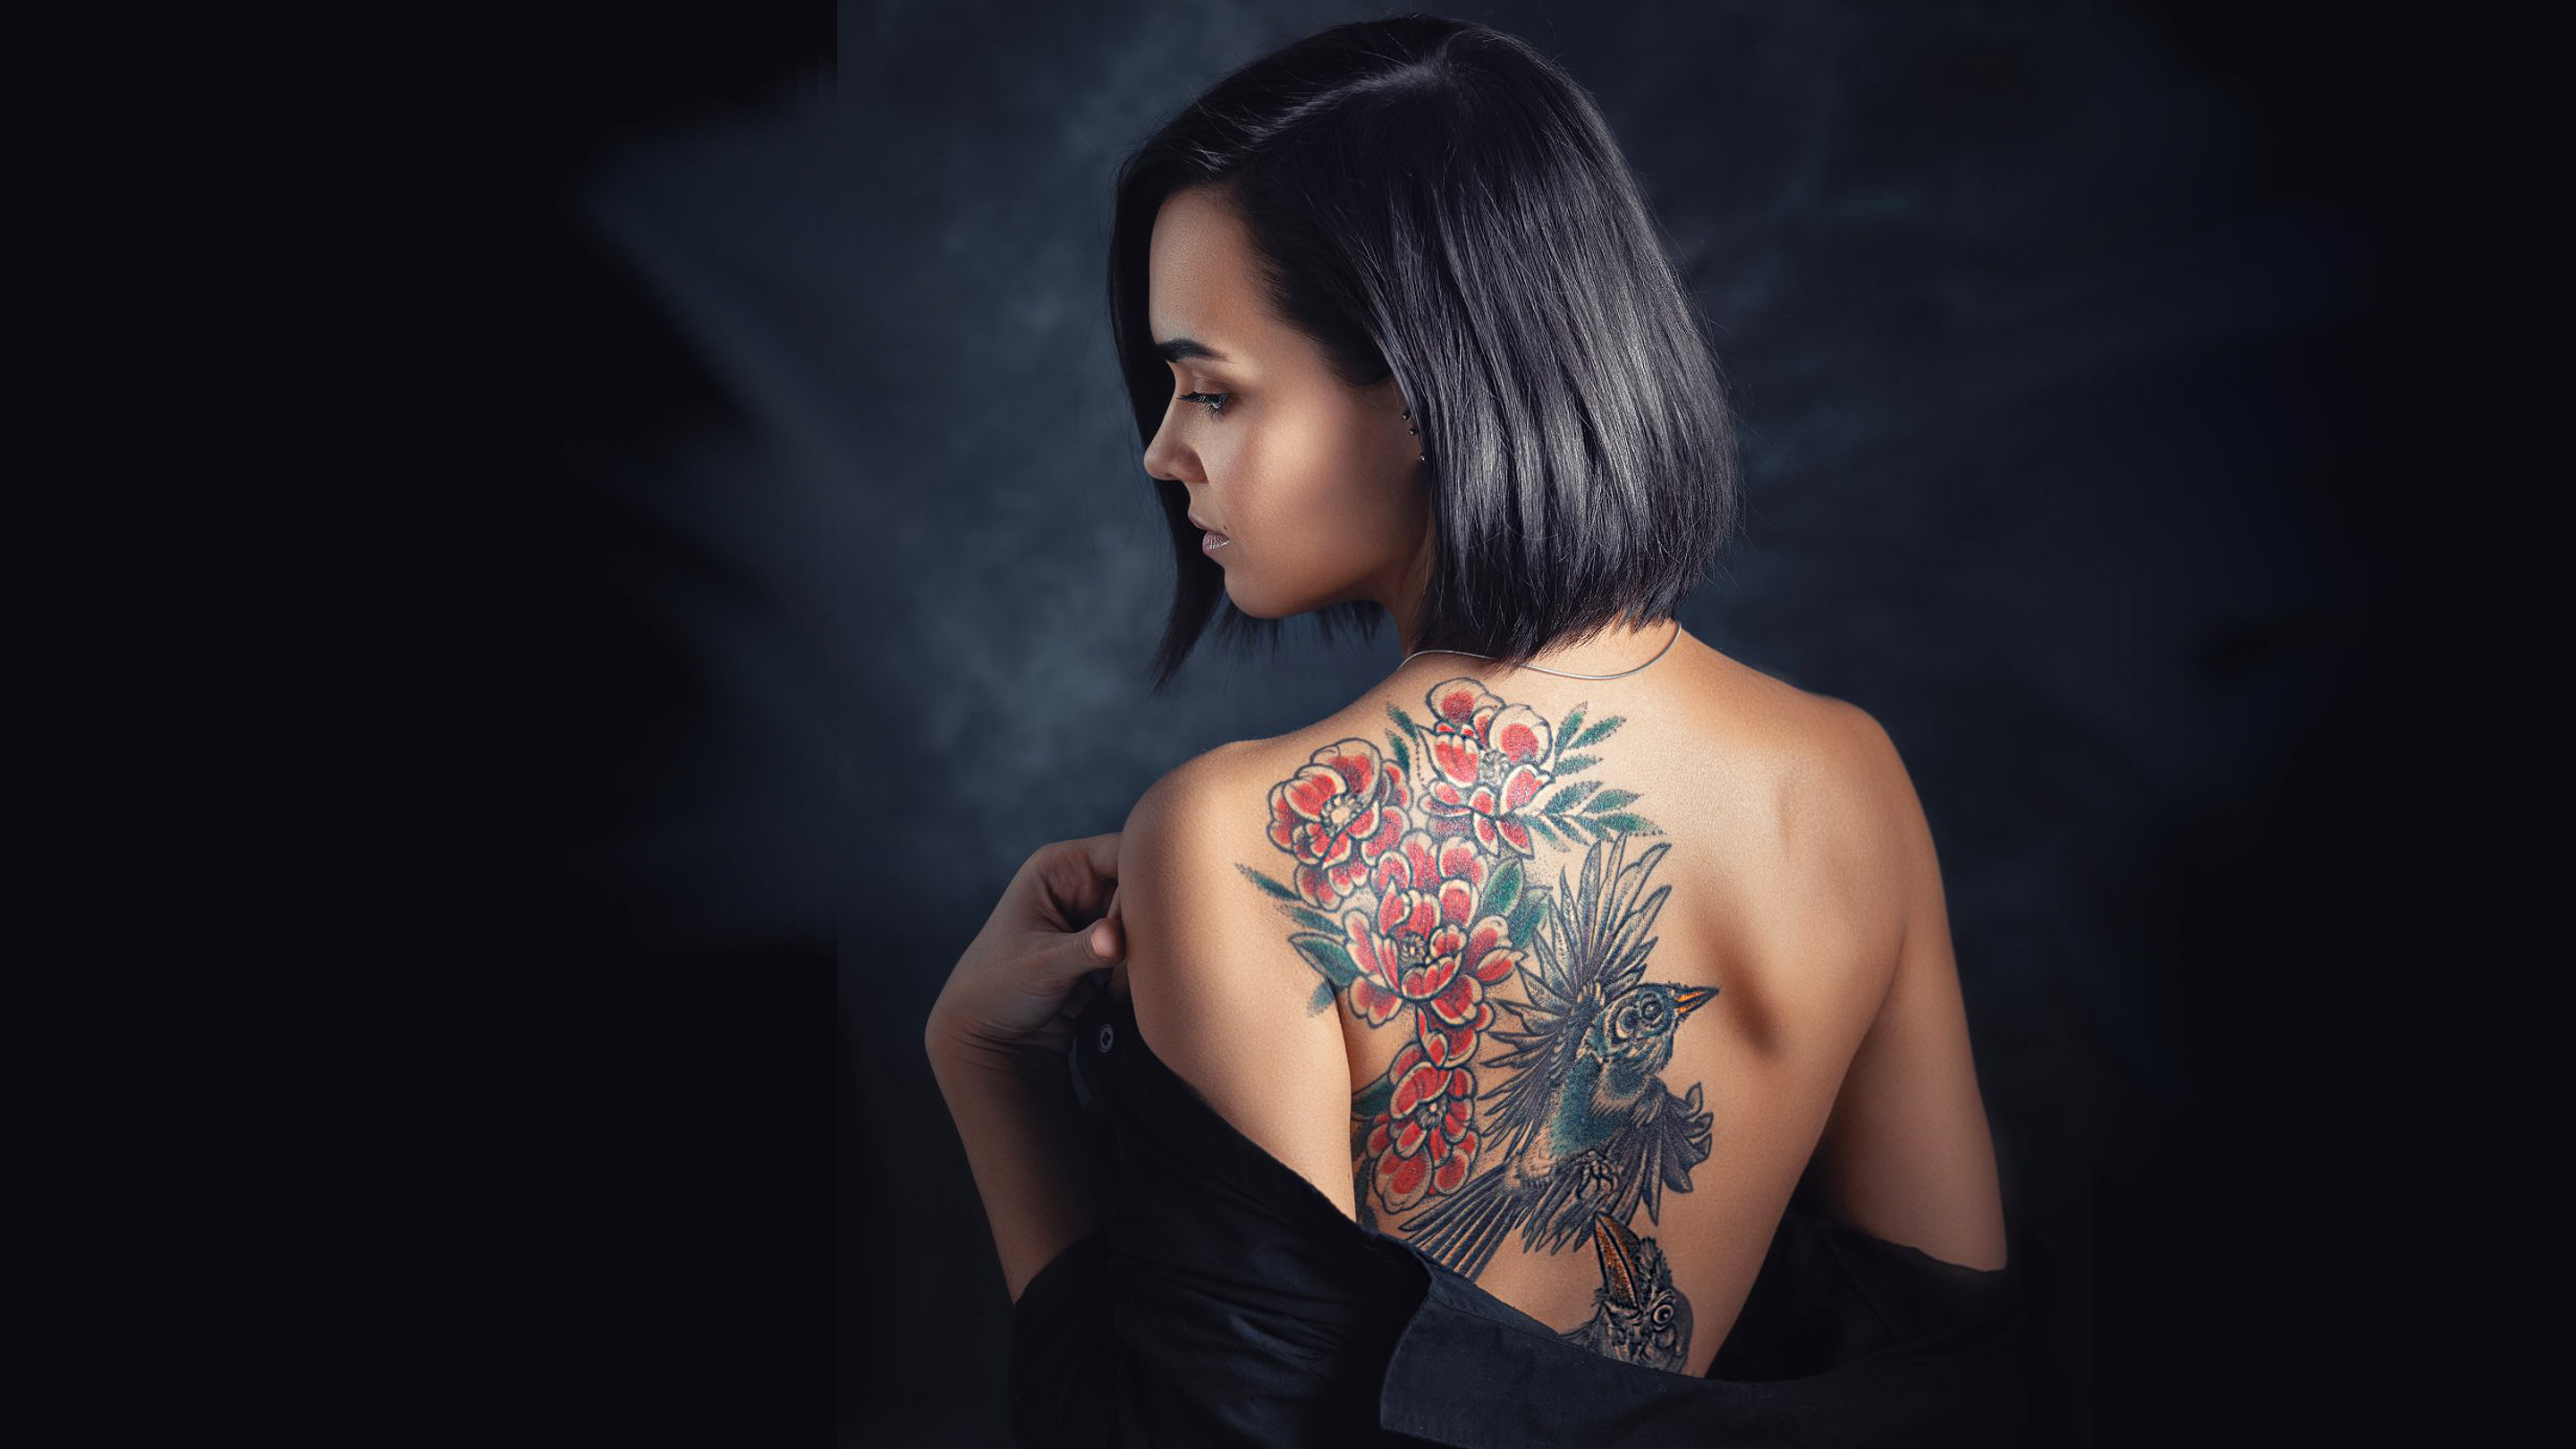 Free photo Beautiful dark-haired girl with short hair shows off her tattoo on her back